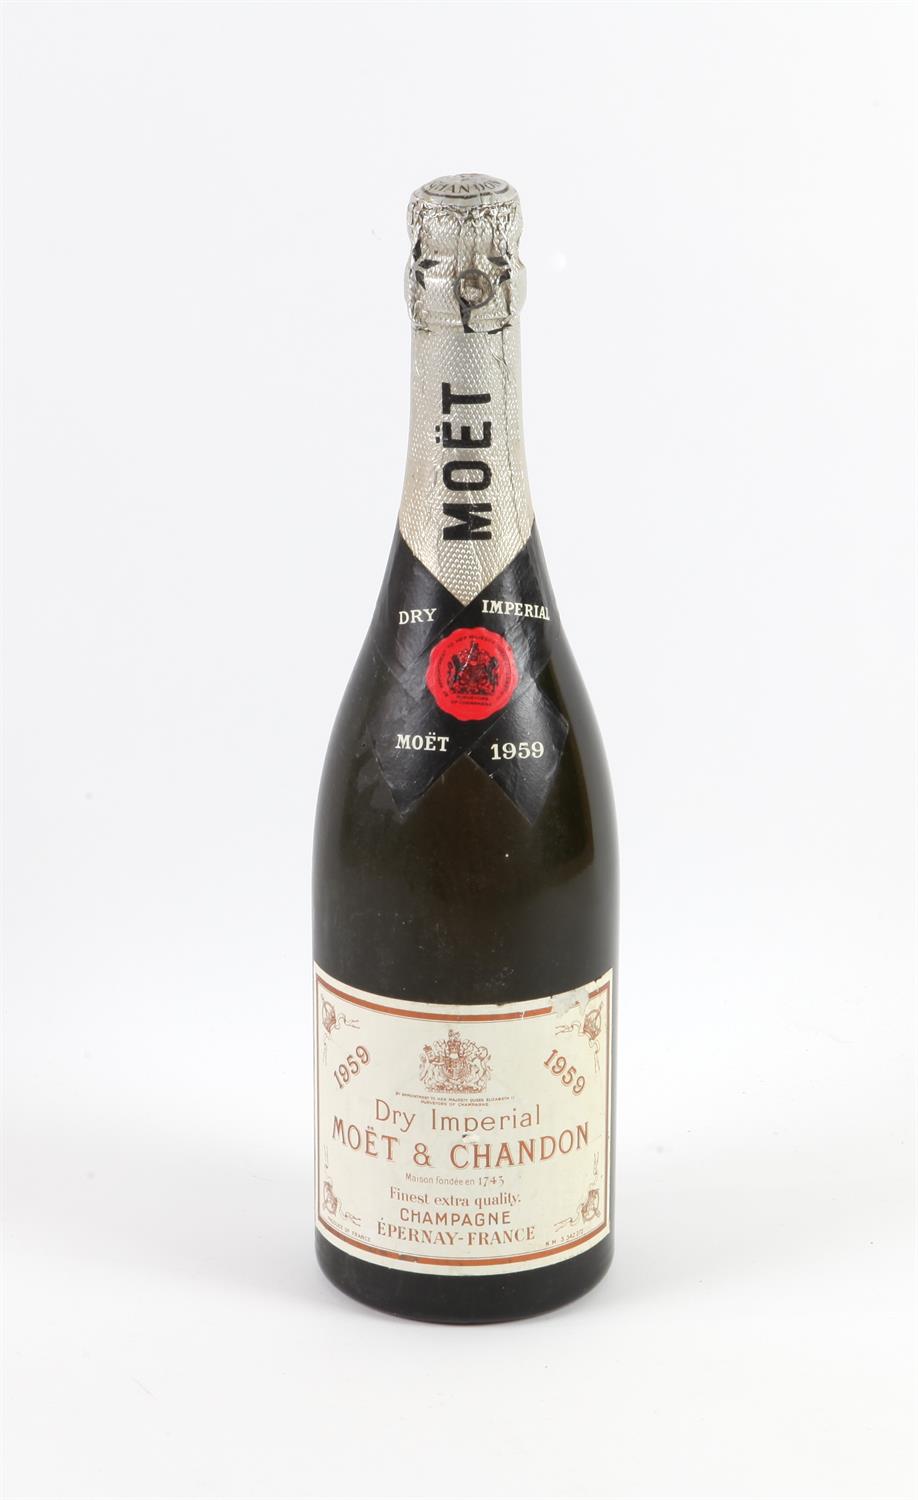 1959 Moet & Chandon Dry Imperial Champagne (capsule damaged)